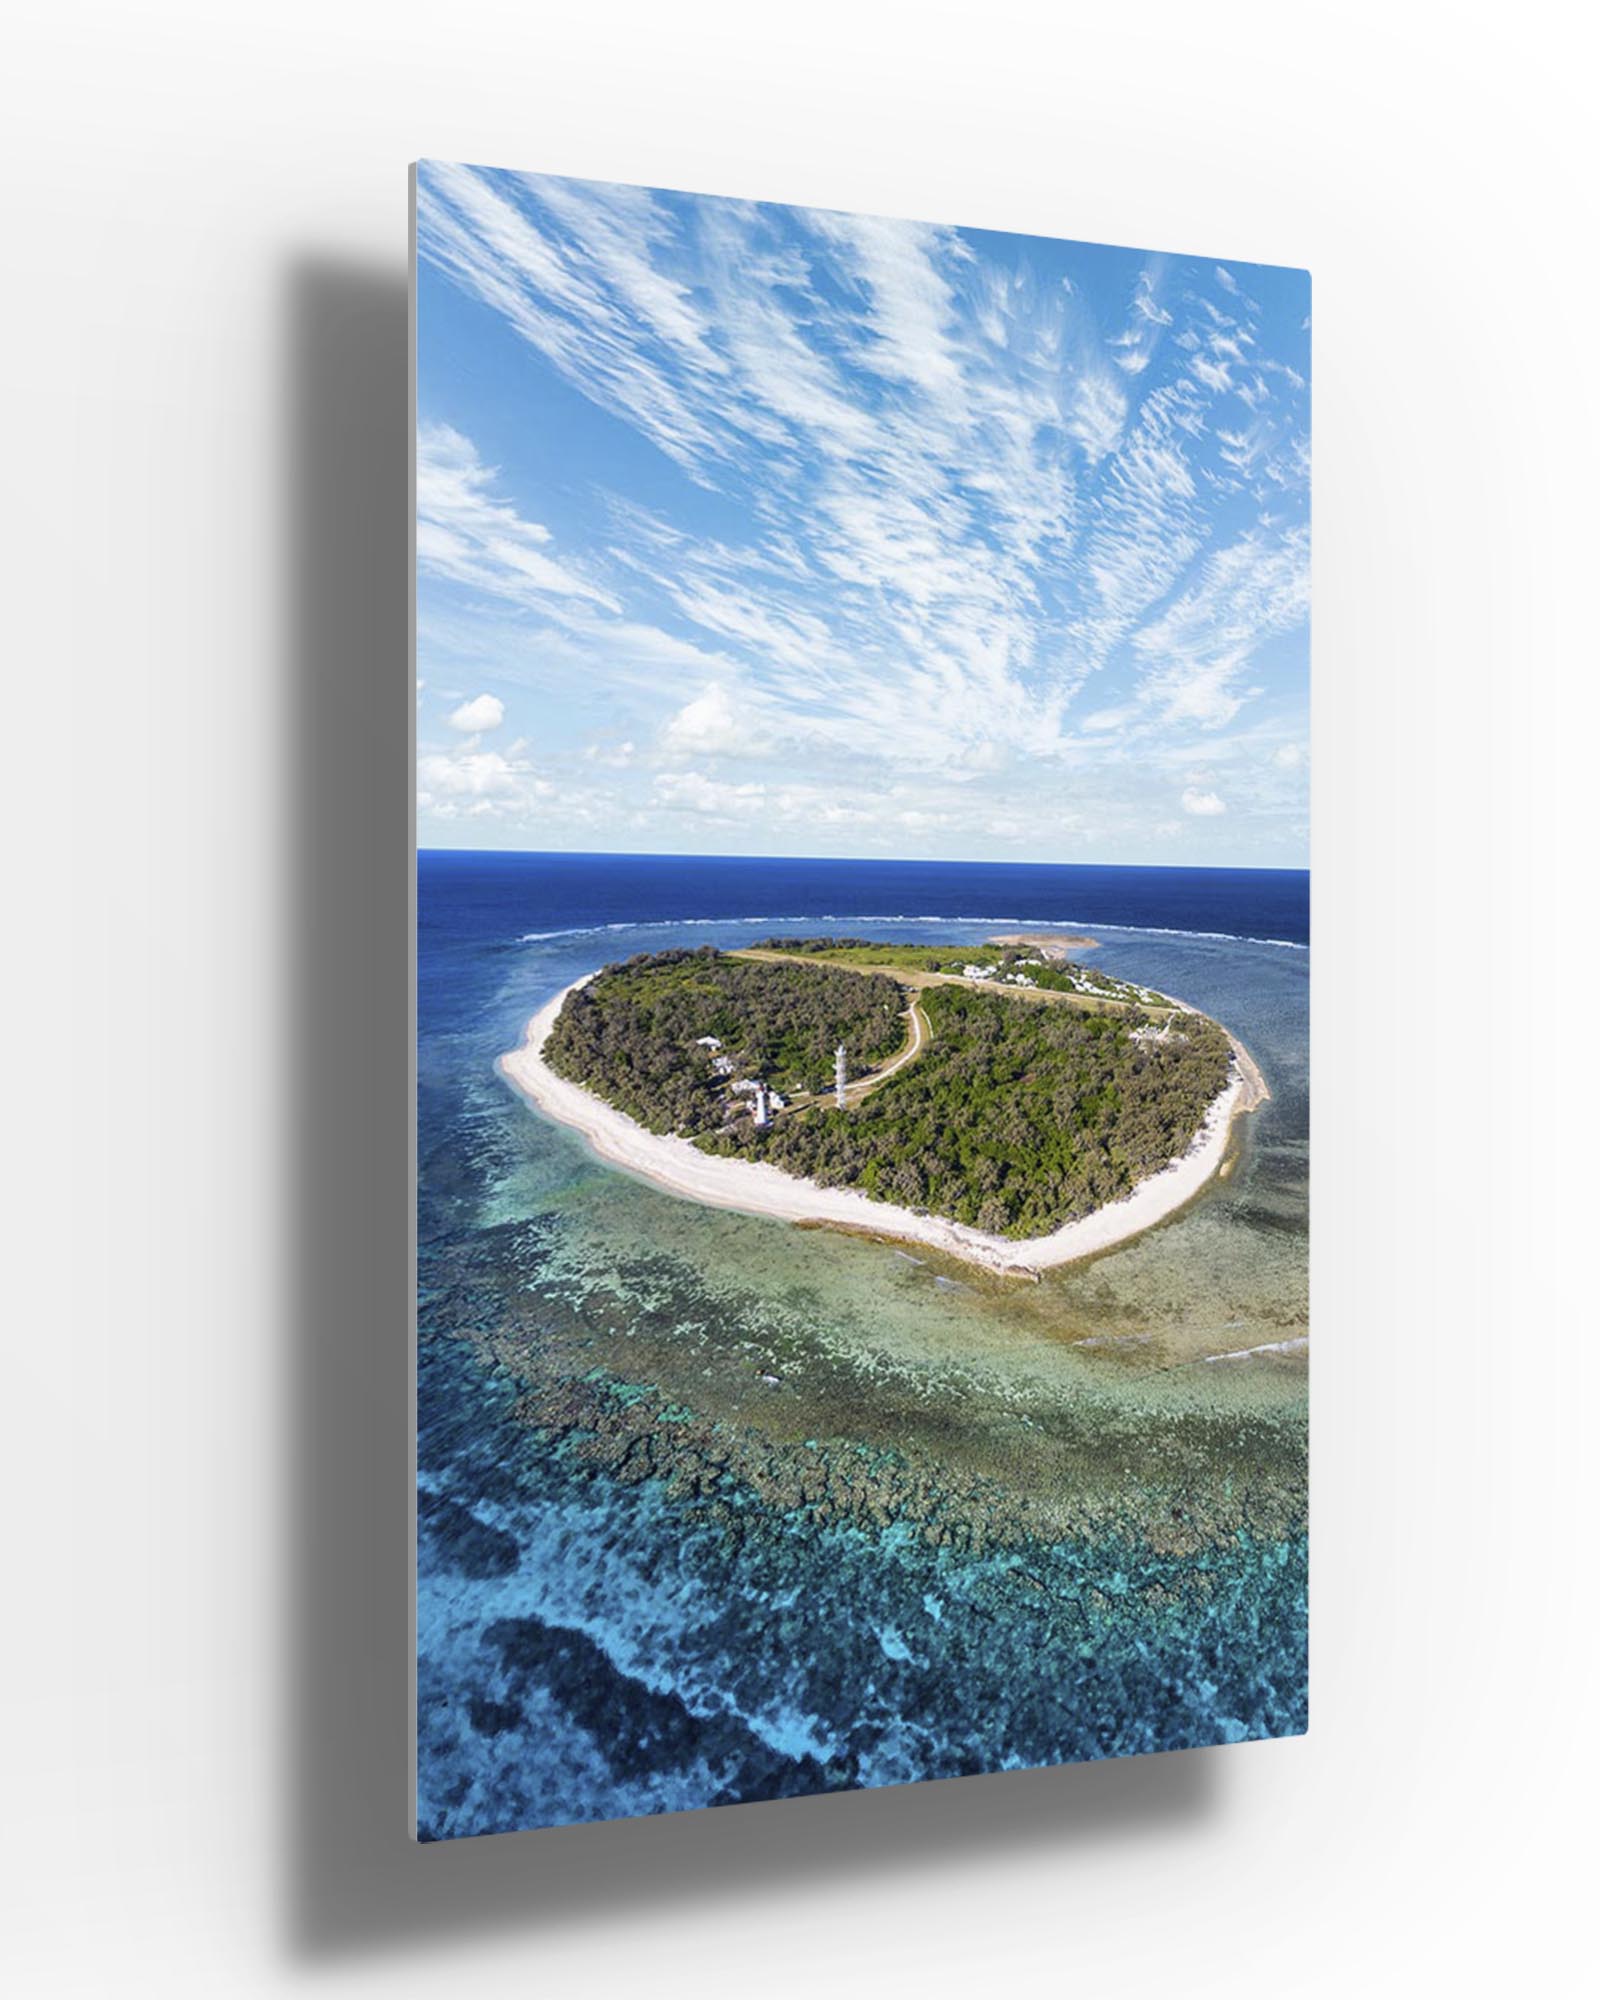 Lady Elliot Island From Above Vertical